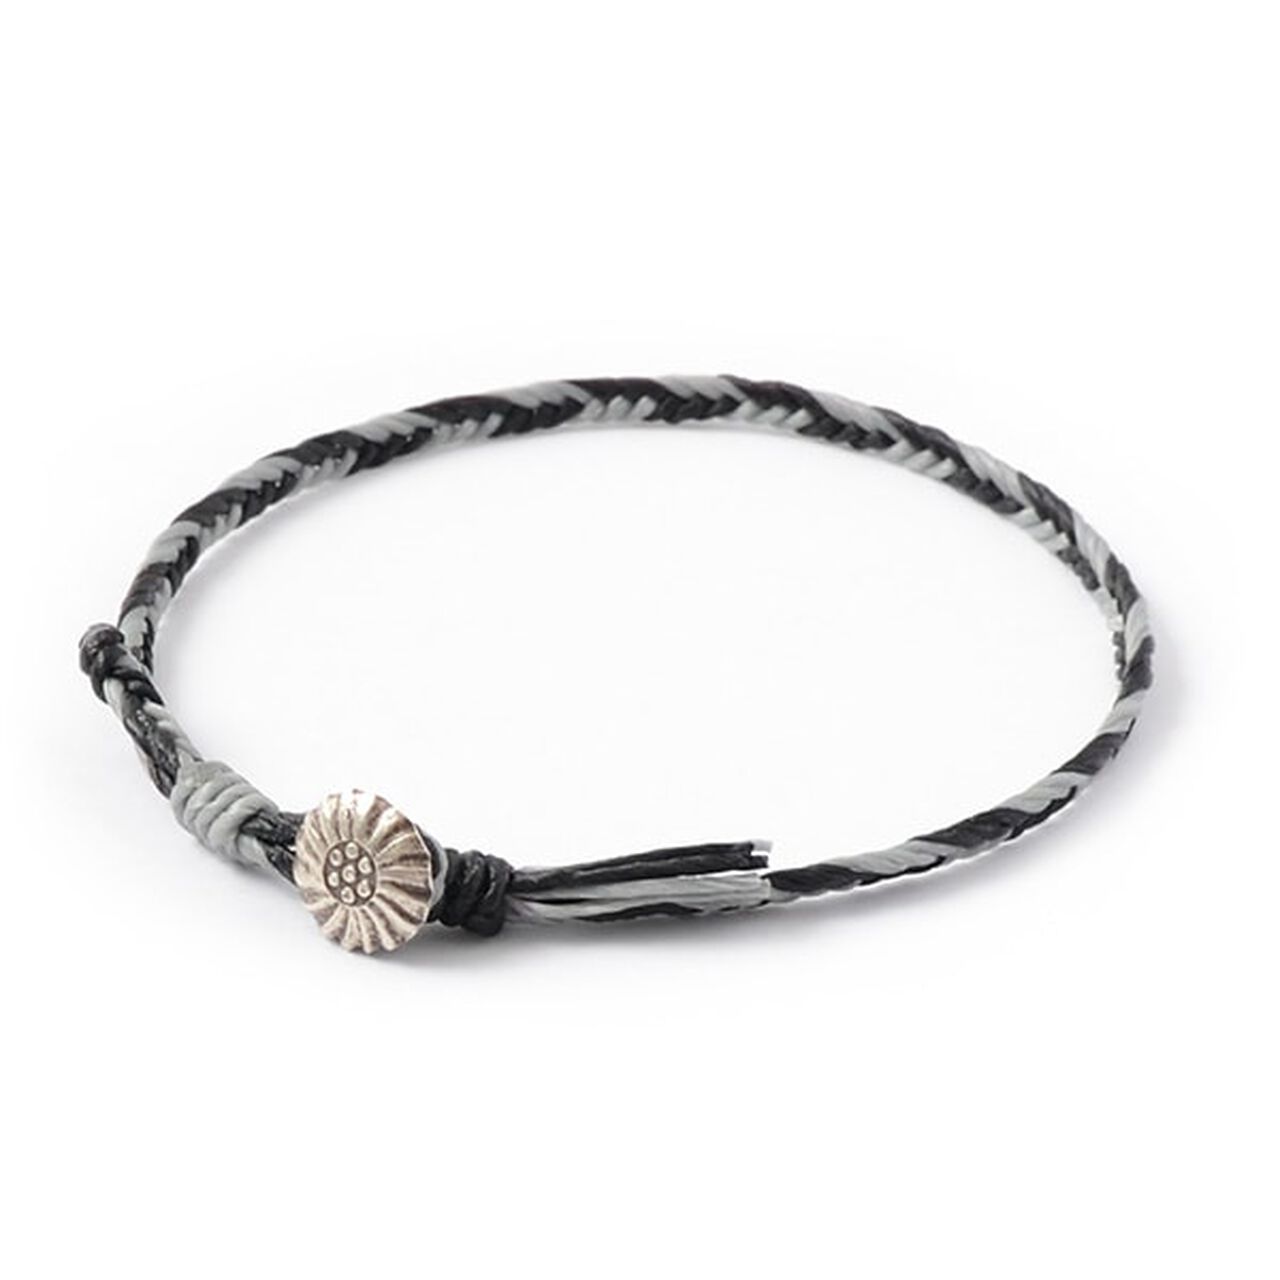 2-Tone Wax Cord Concho Anklet,Black_Grey, large image number 0